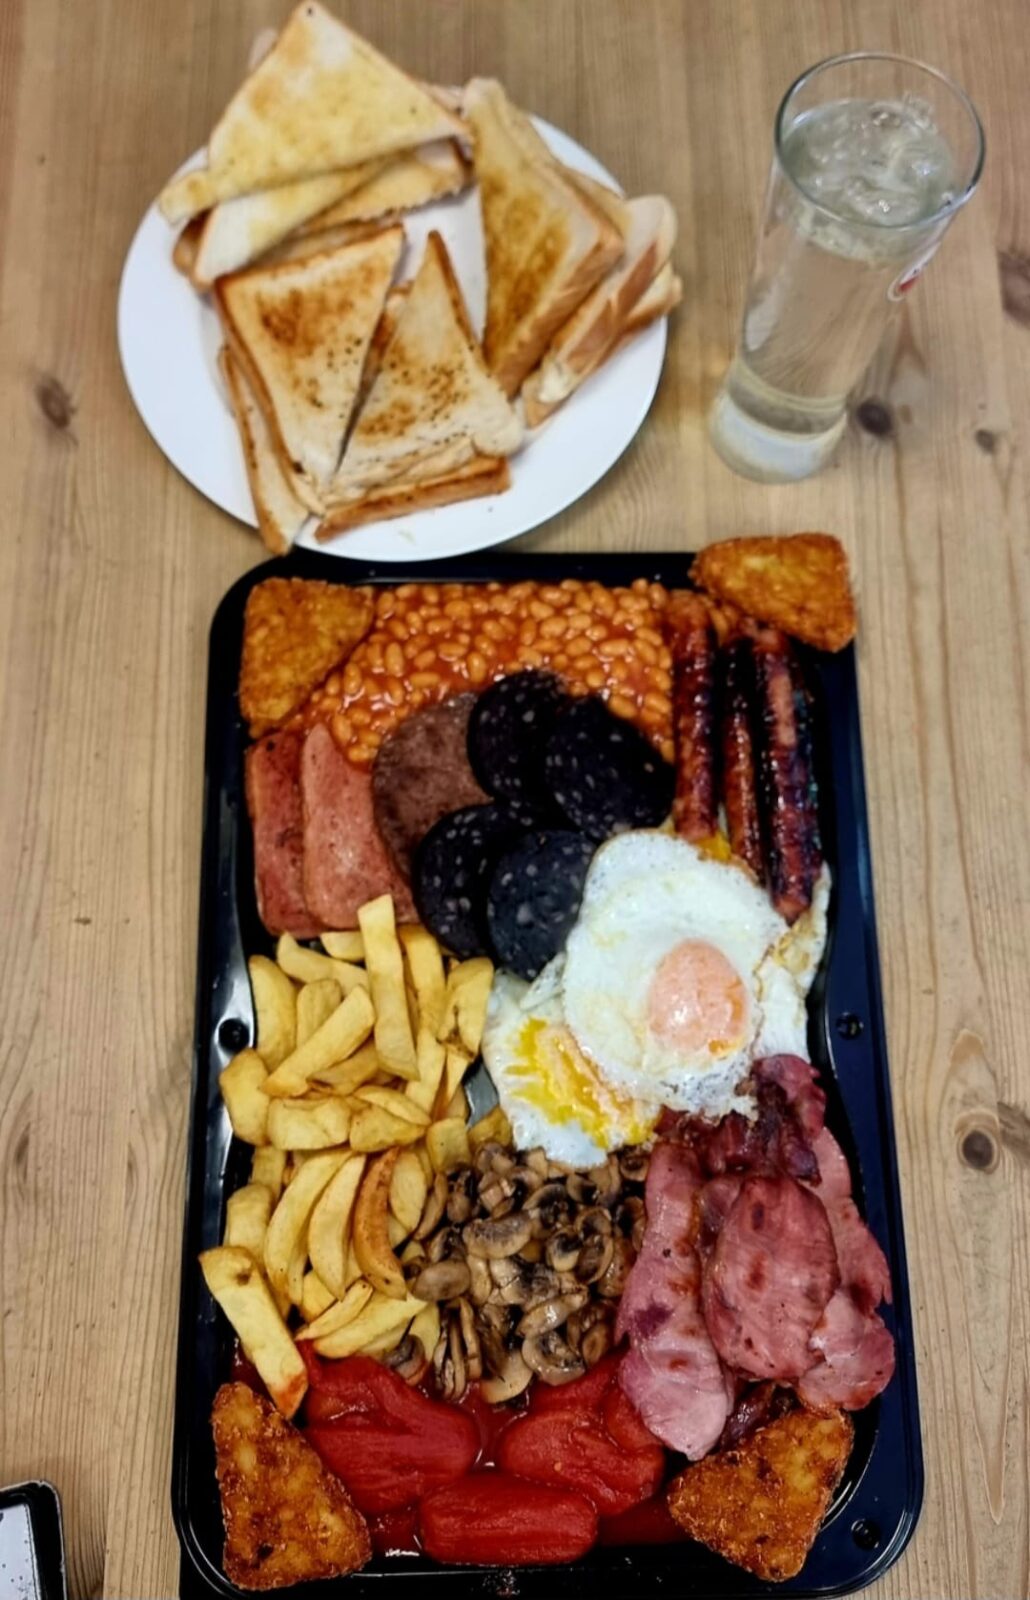 The full english challenge with 34 items